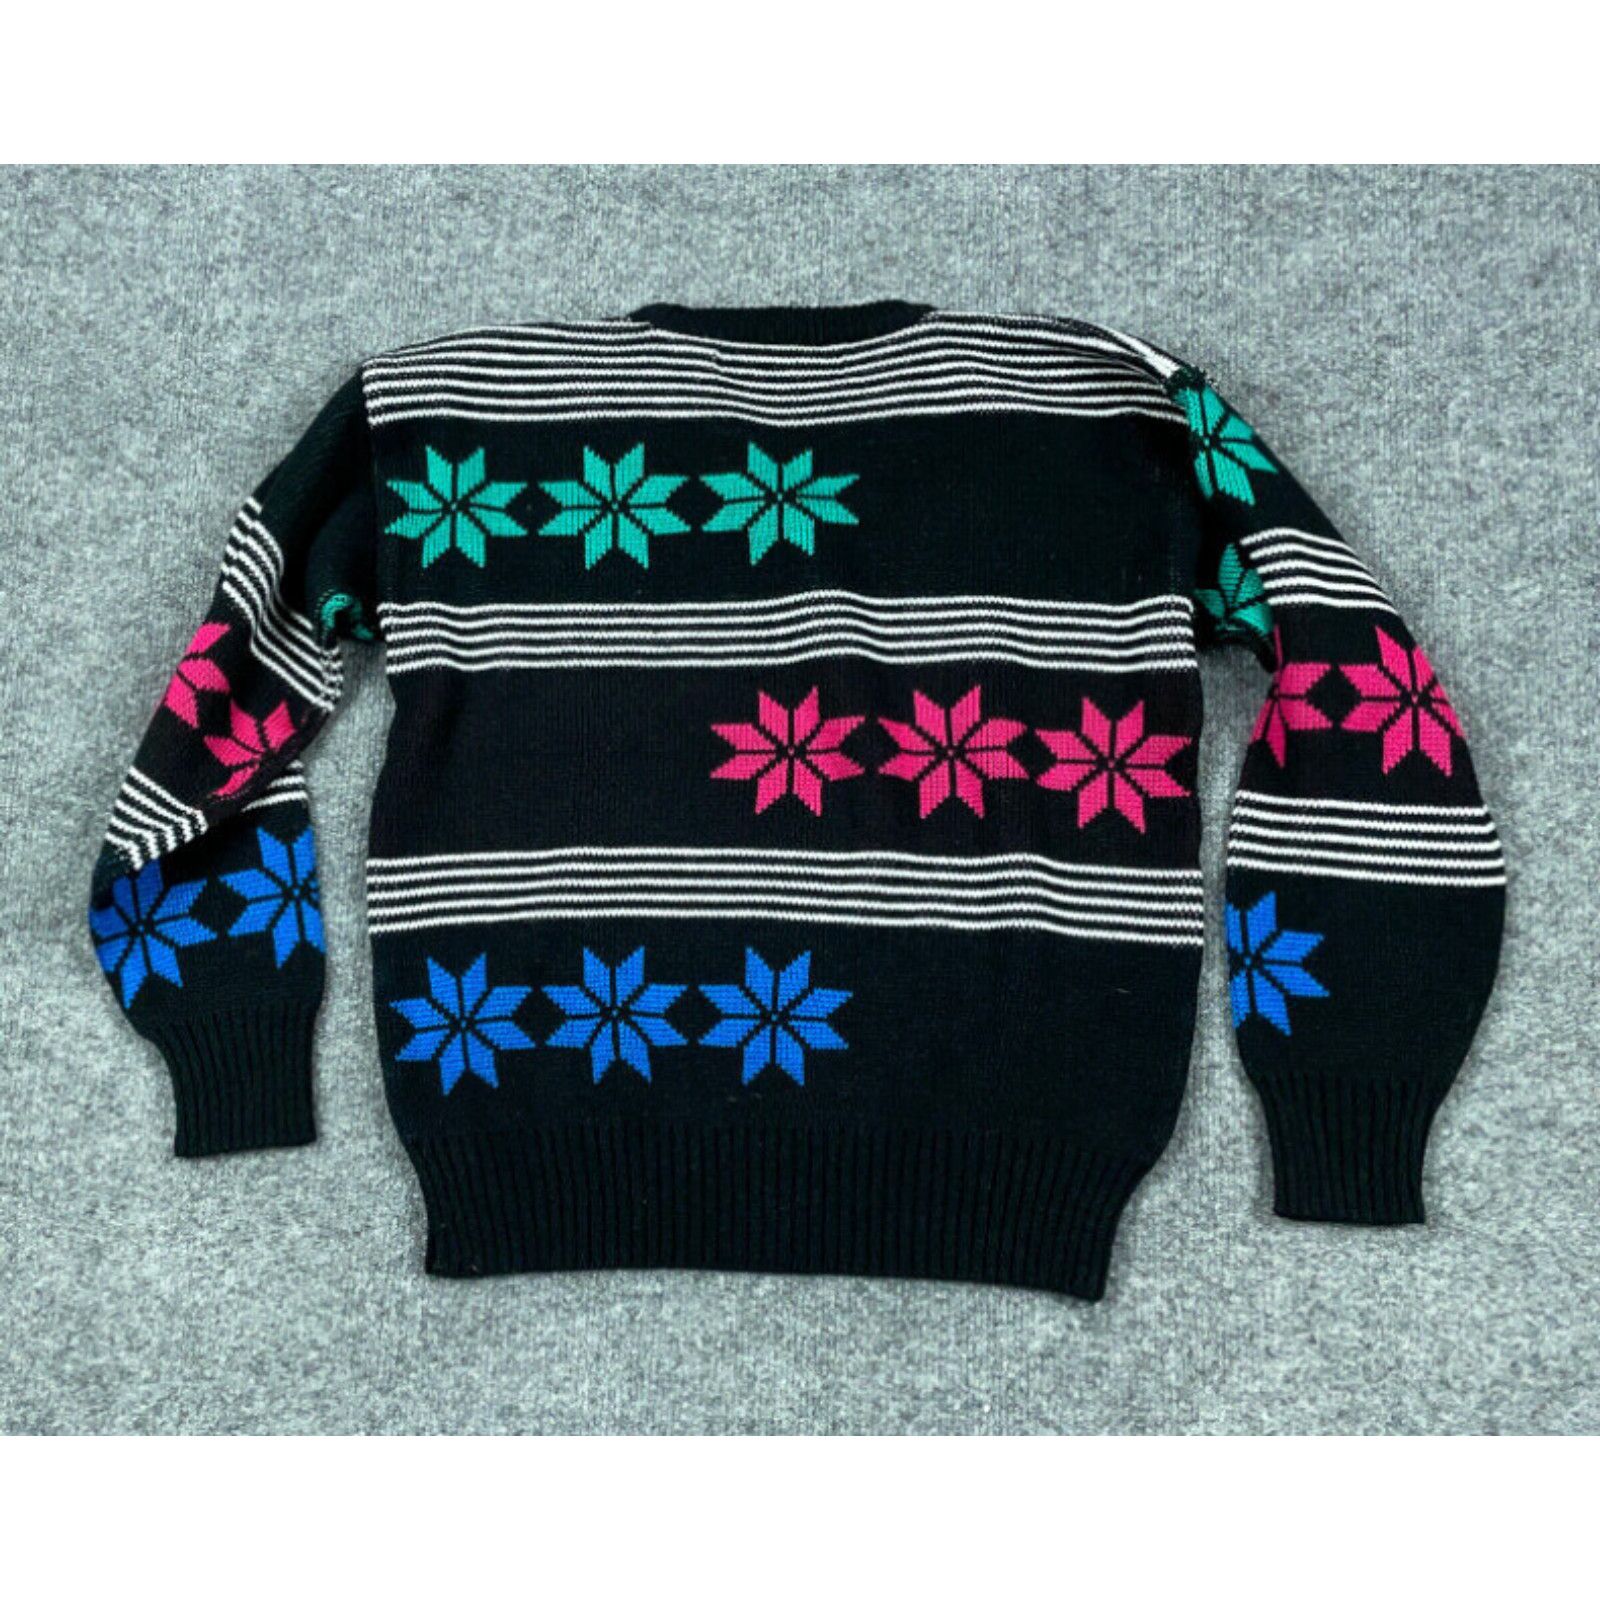 Vintage VTG 80s Black Colorful Snowflake Pullover Sweater Adult Small Hipster Geometric Size US S / EU 44-46 / 1 - 2 Preview